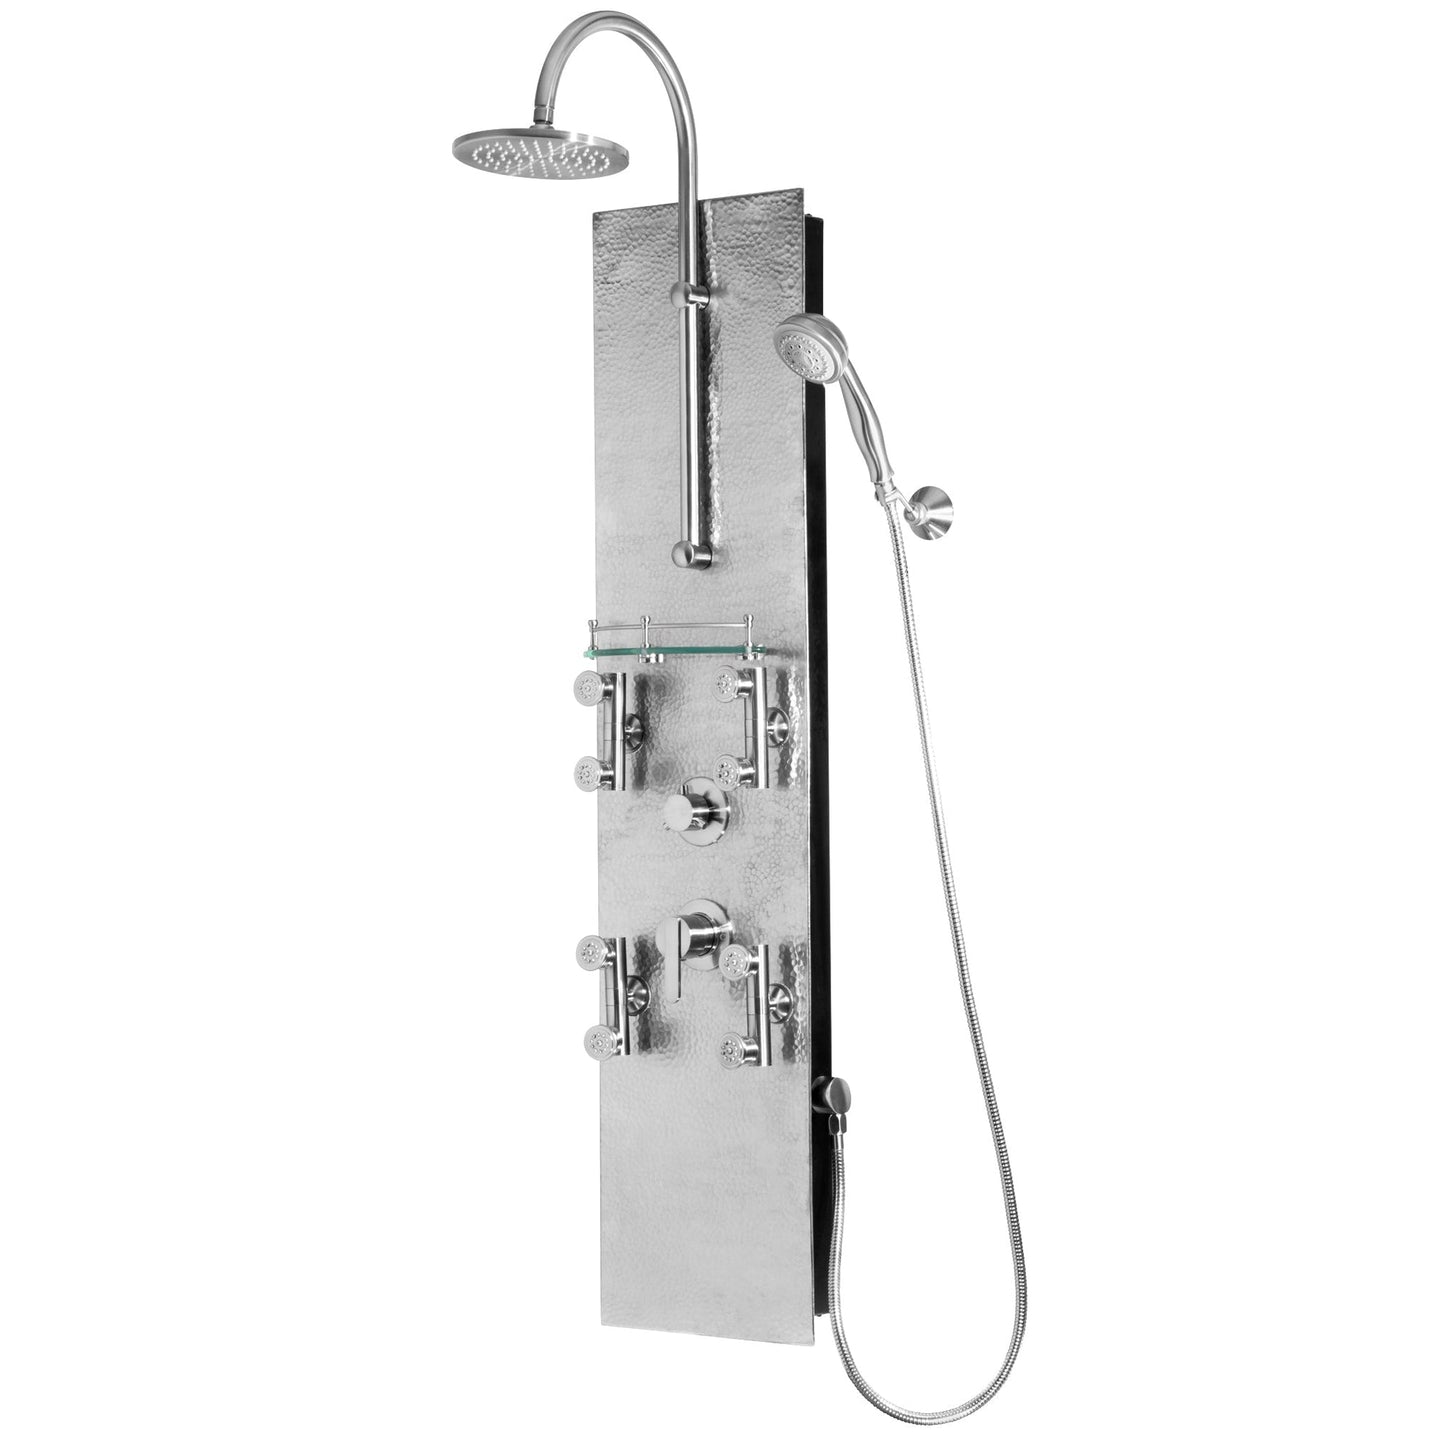 PULSE ShowerSpas Vaquero 2.5 GPM Rain Shower Panel in Hammered Brushed Nickel Finish With 4 Dual Head Body Jets and 5-Function Hand Shower